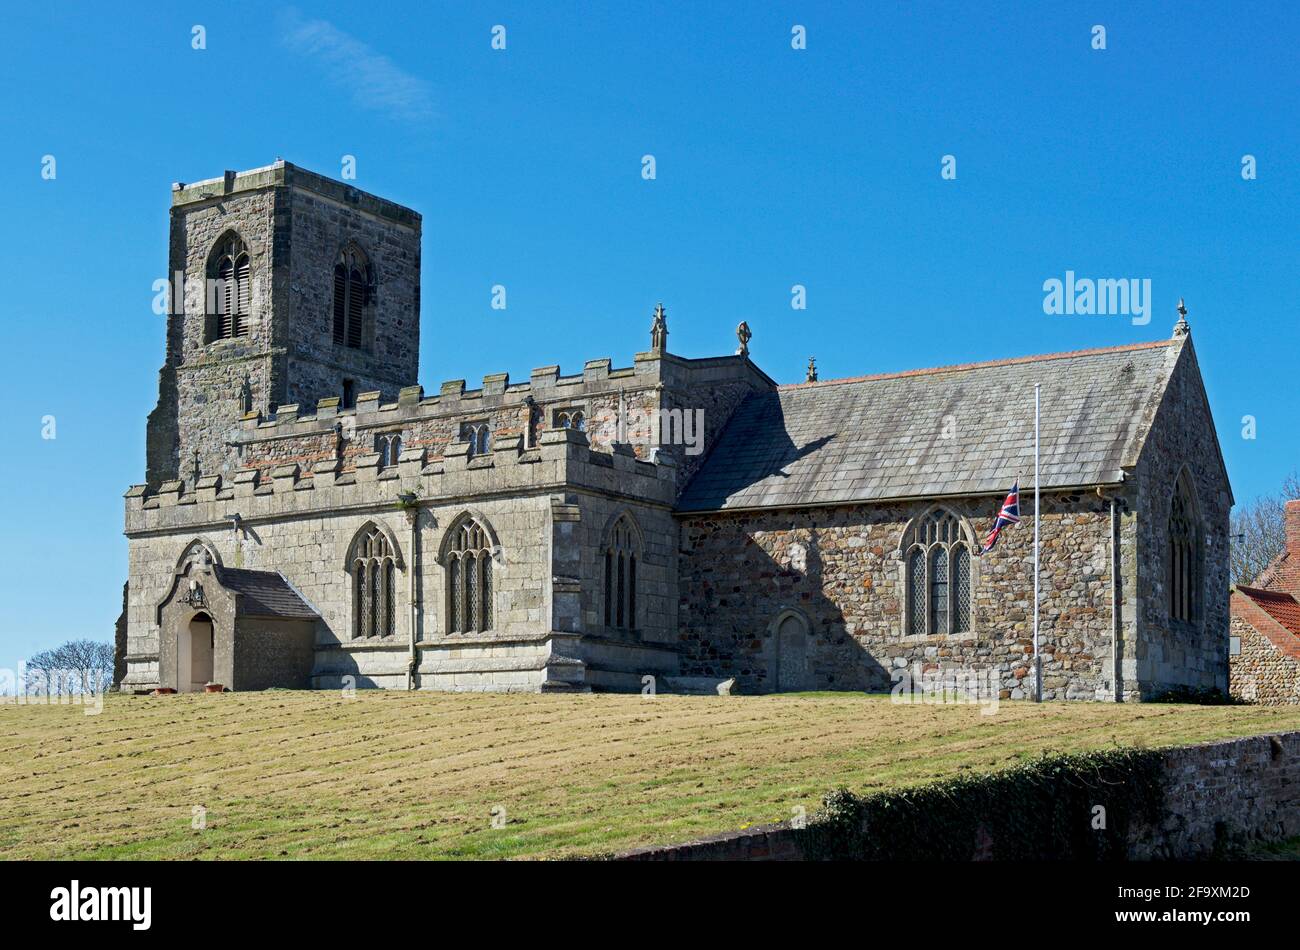 All Saints Church in the village of Skipsea, East Yorkshire, England UK Stock Photo